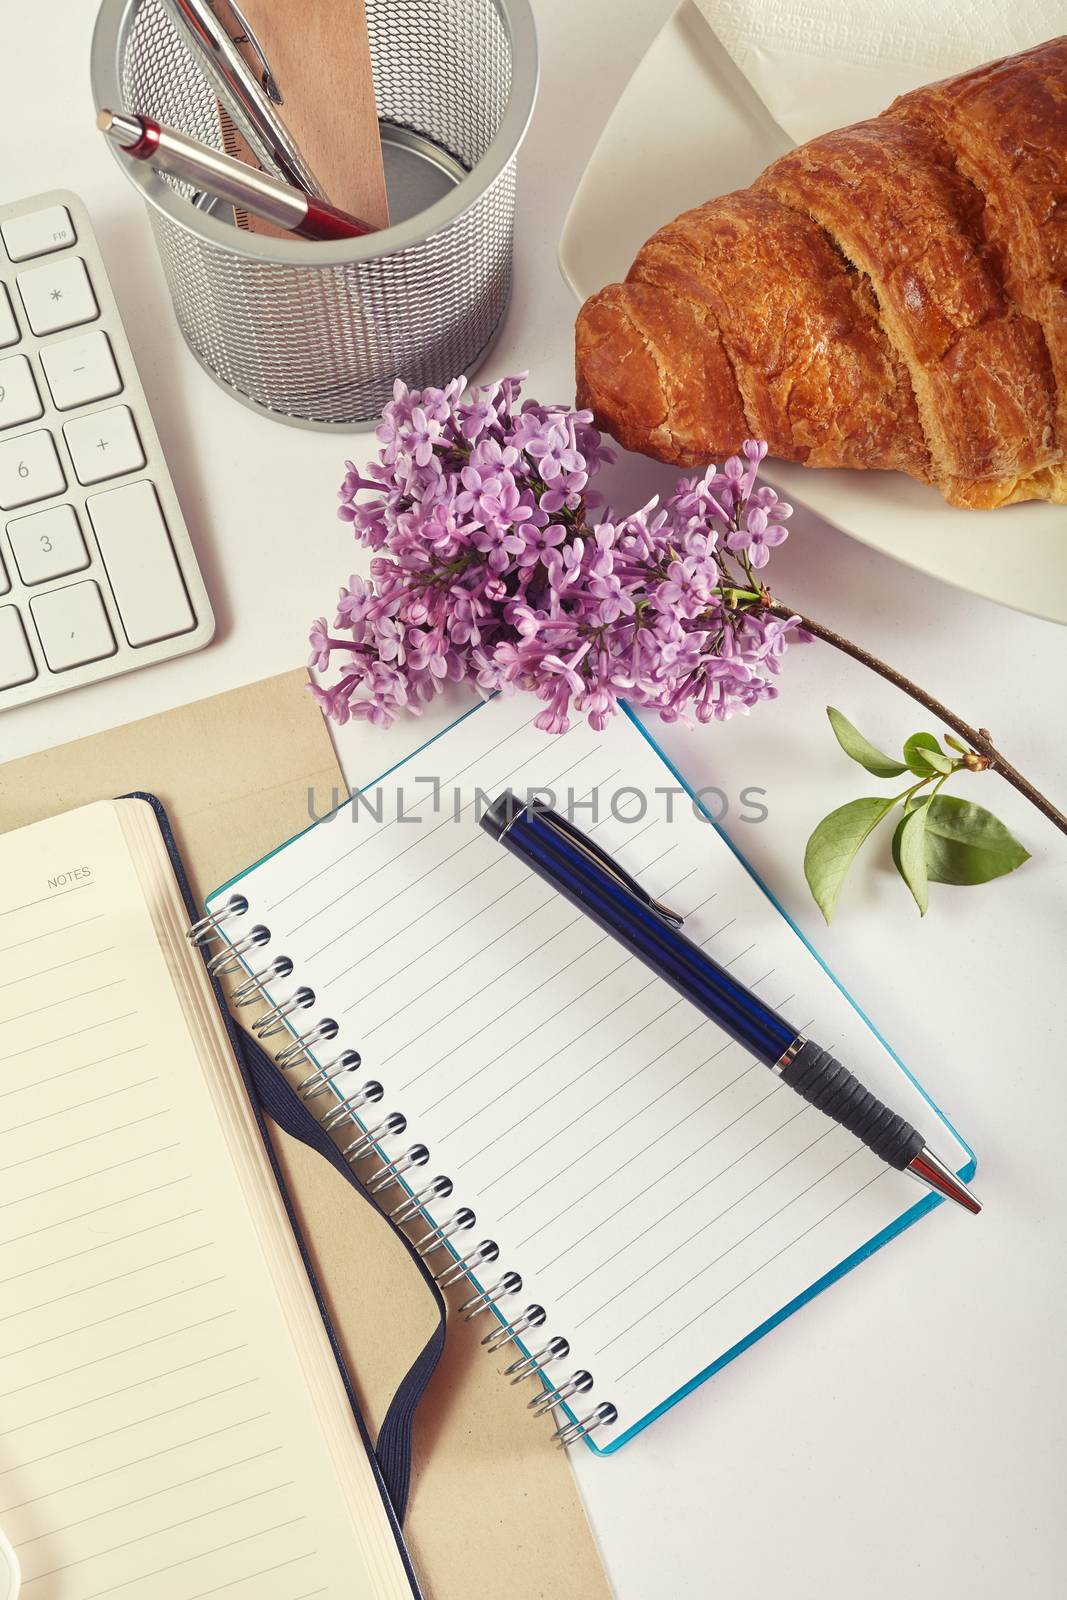 Top view office workplace - croissant, keyboard, calculator, pen, flower and notebook on white table